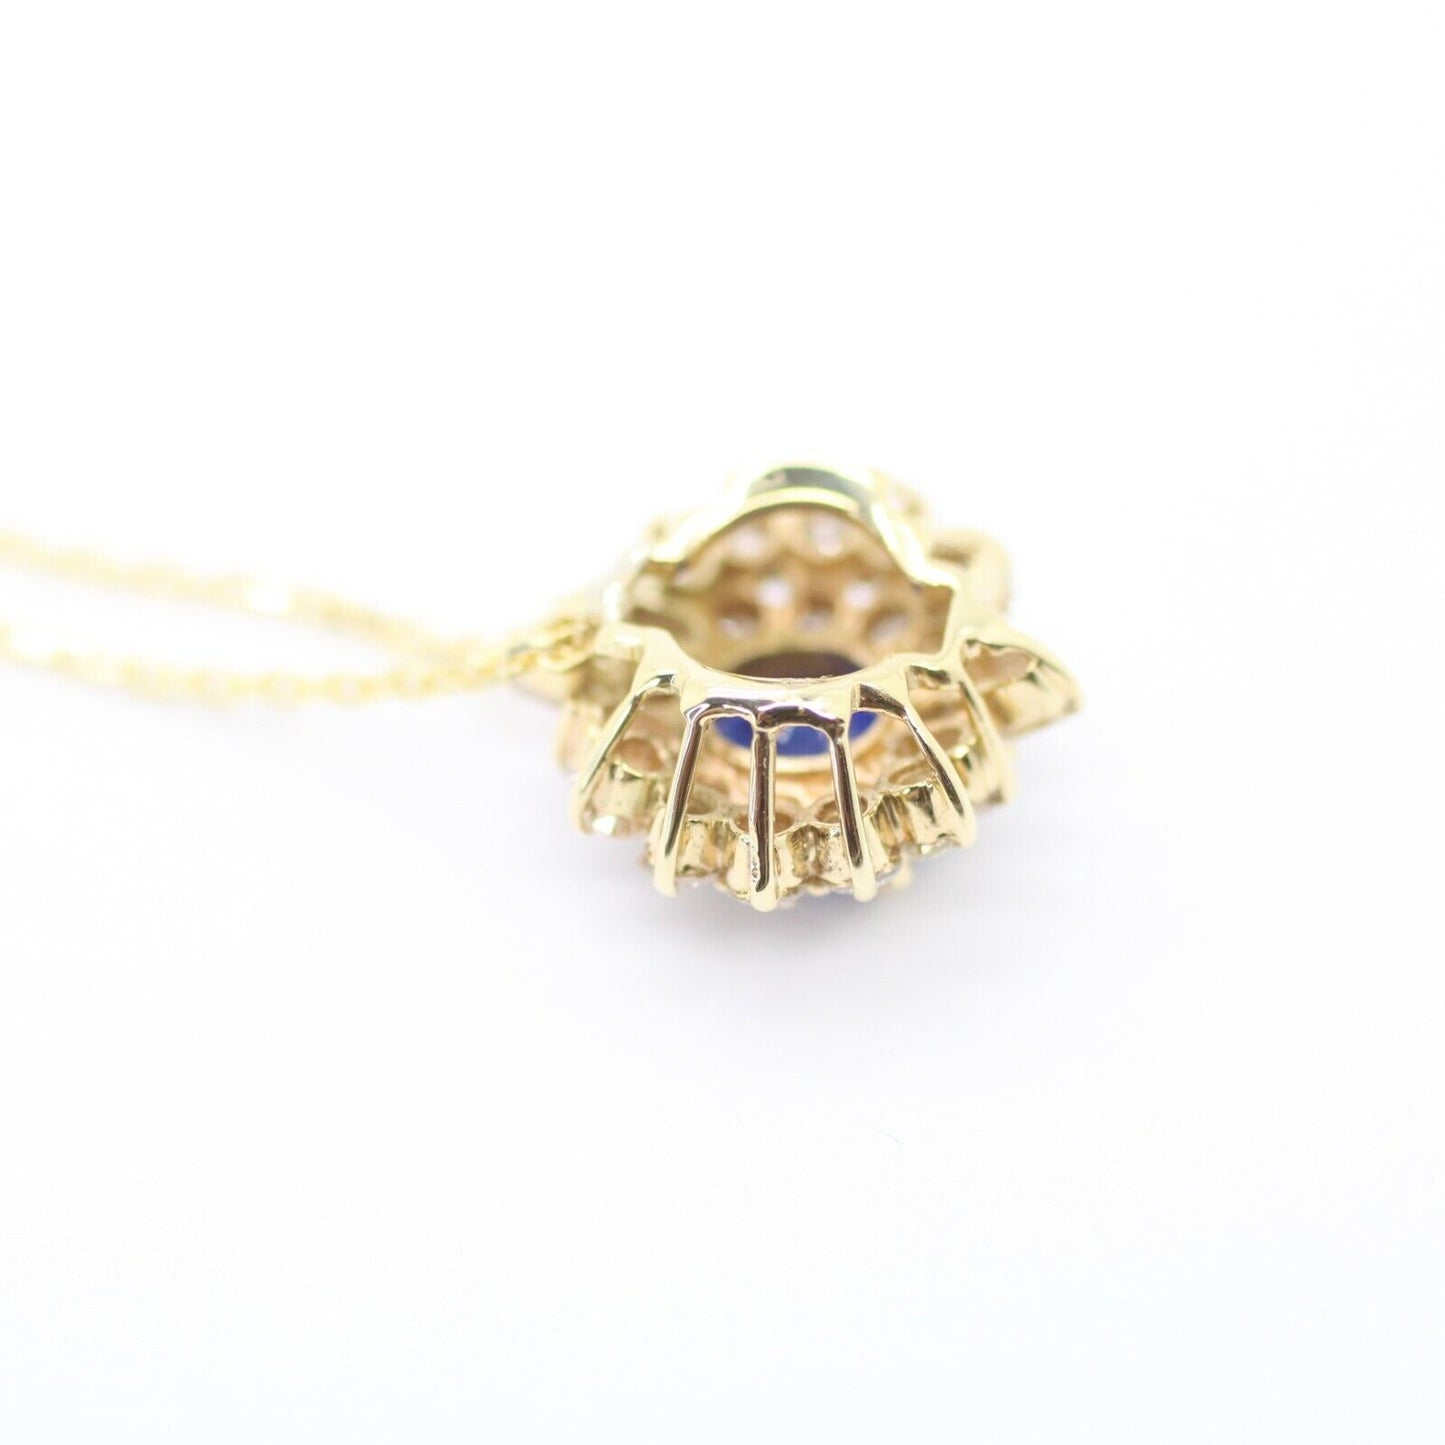 Pear-Shaped Blue Sapphire With Diamonds Pendant Necklace in 14k Yellow Gold